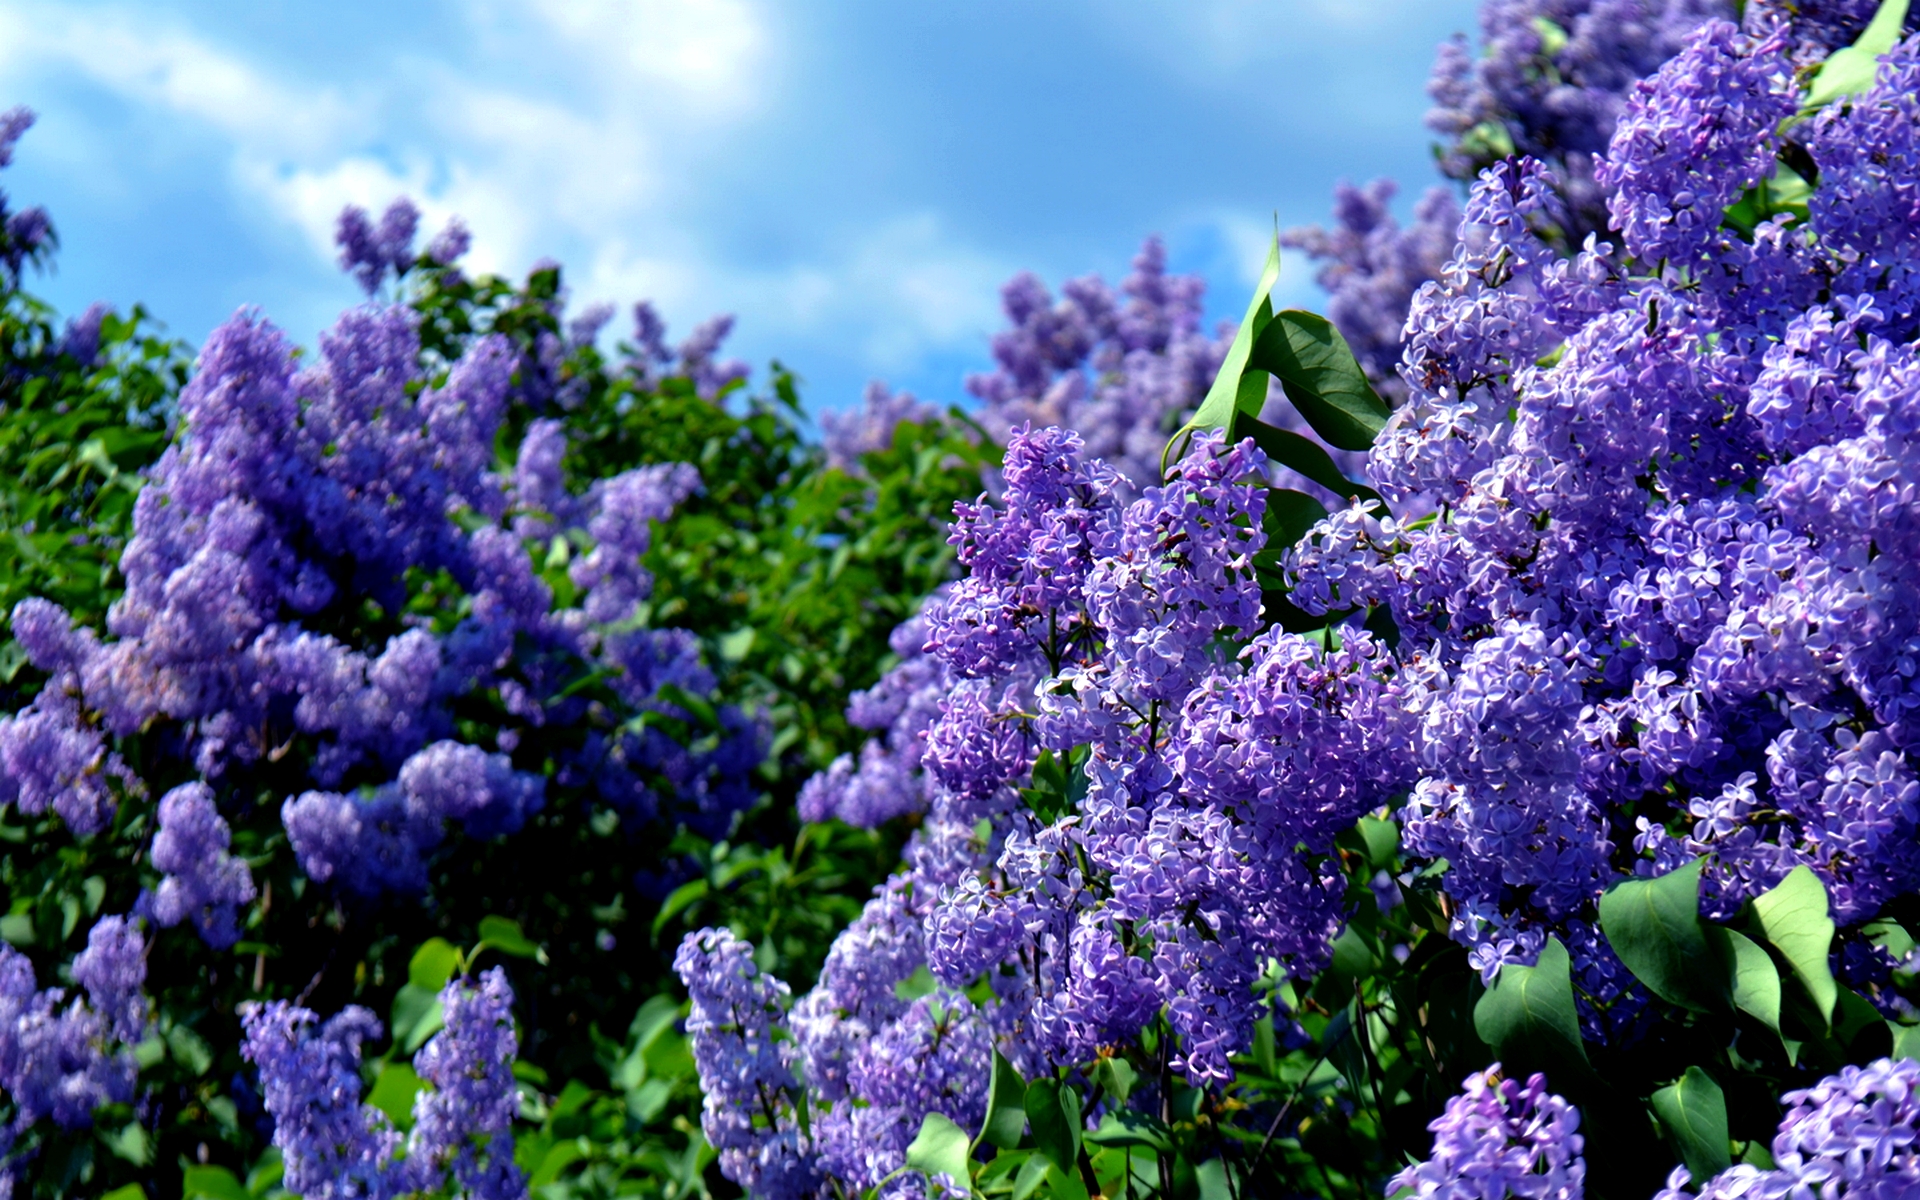 Lilac Flowers in the Spring Flowers amp Nature Background Wallpapers